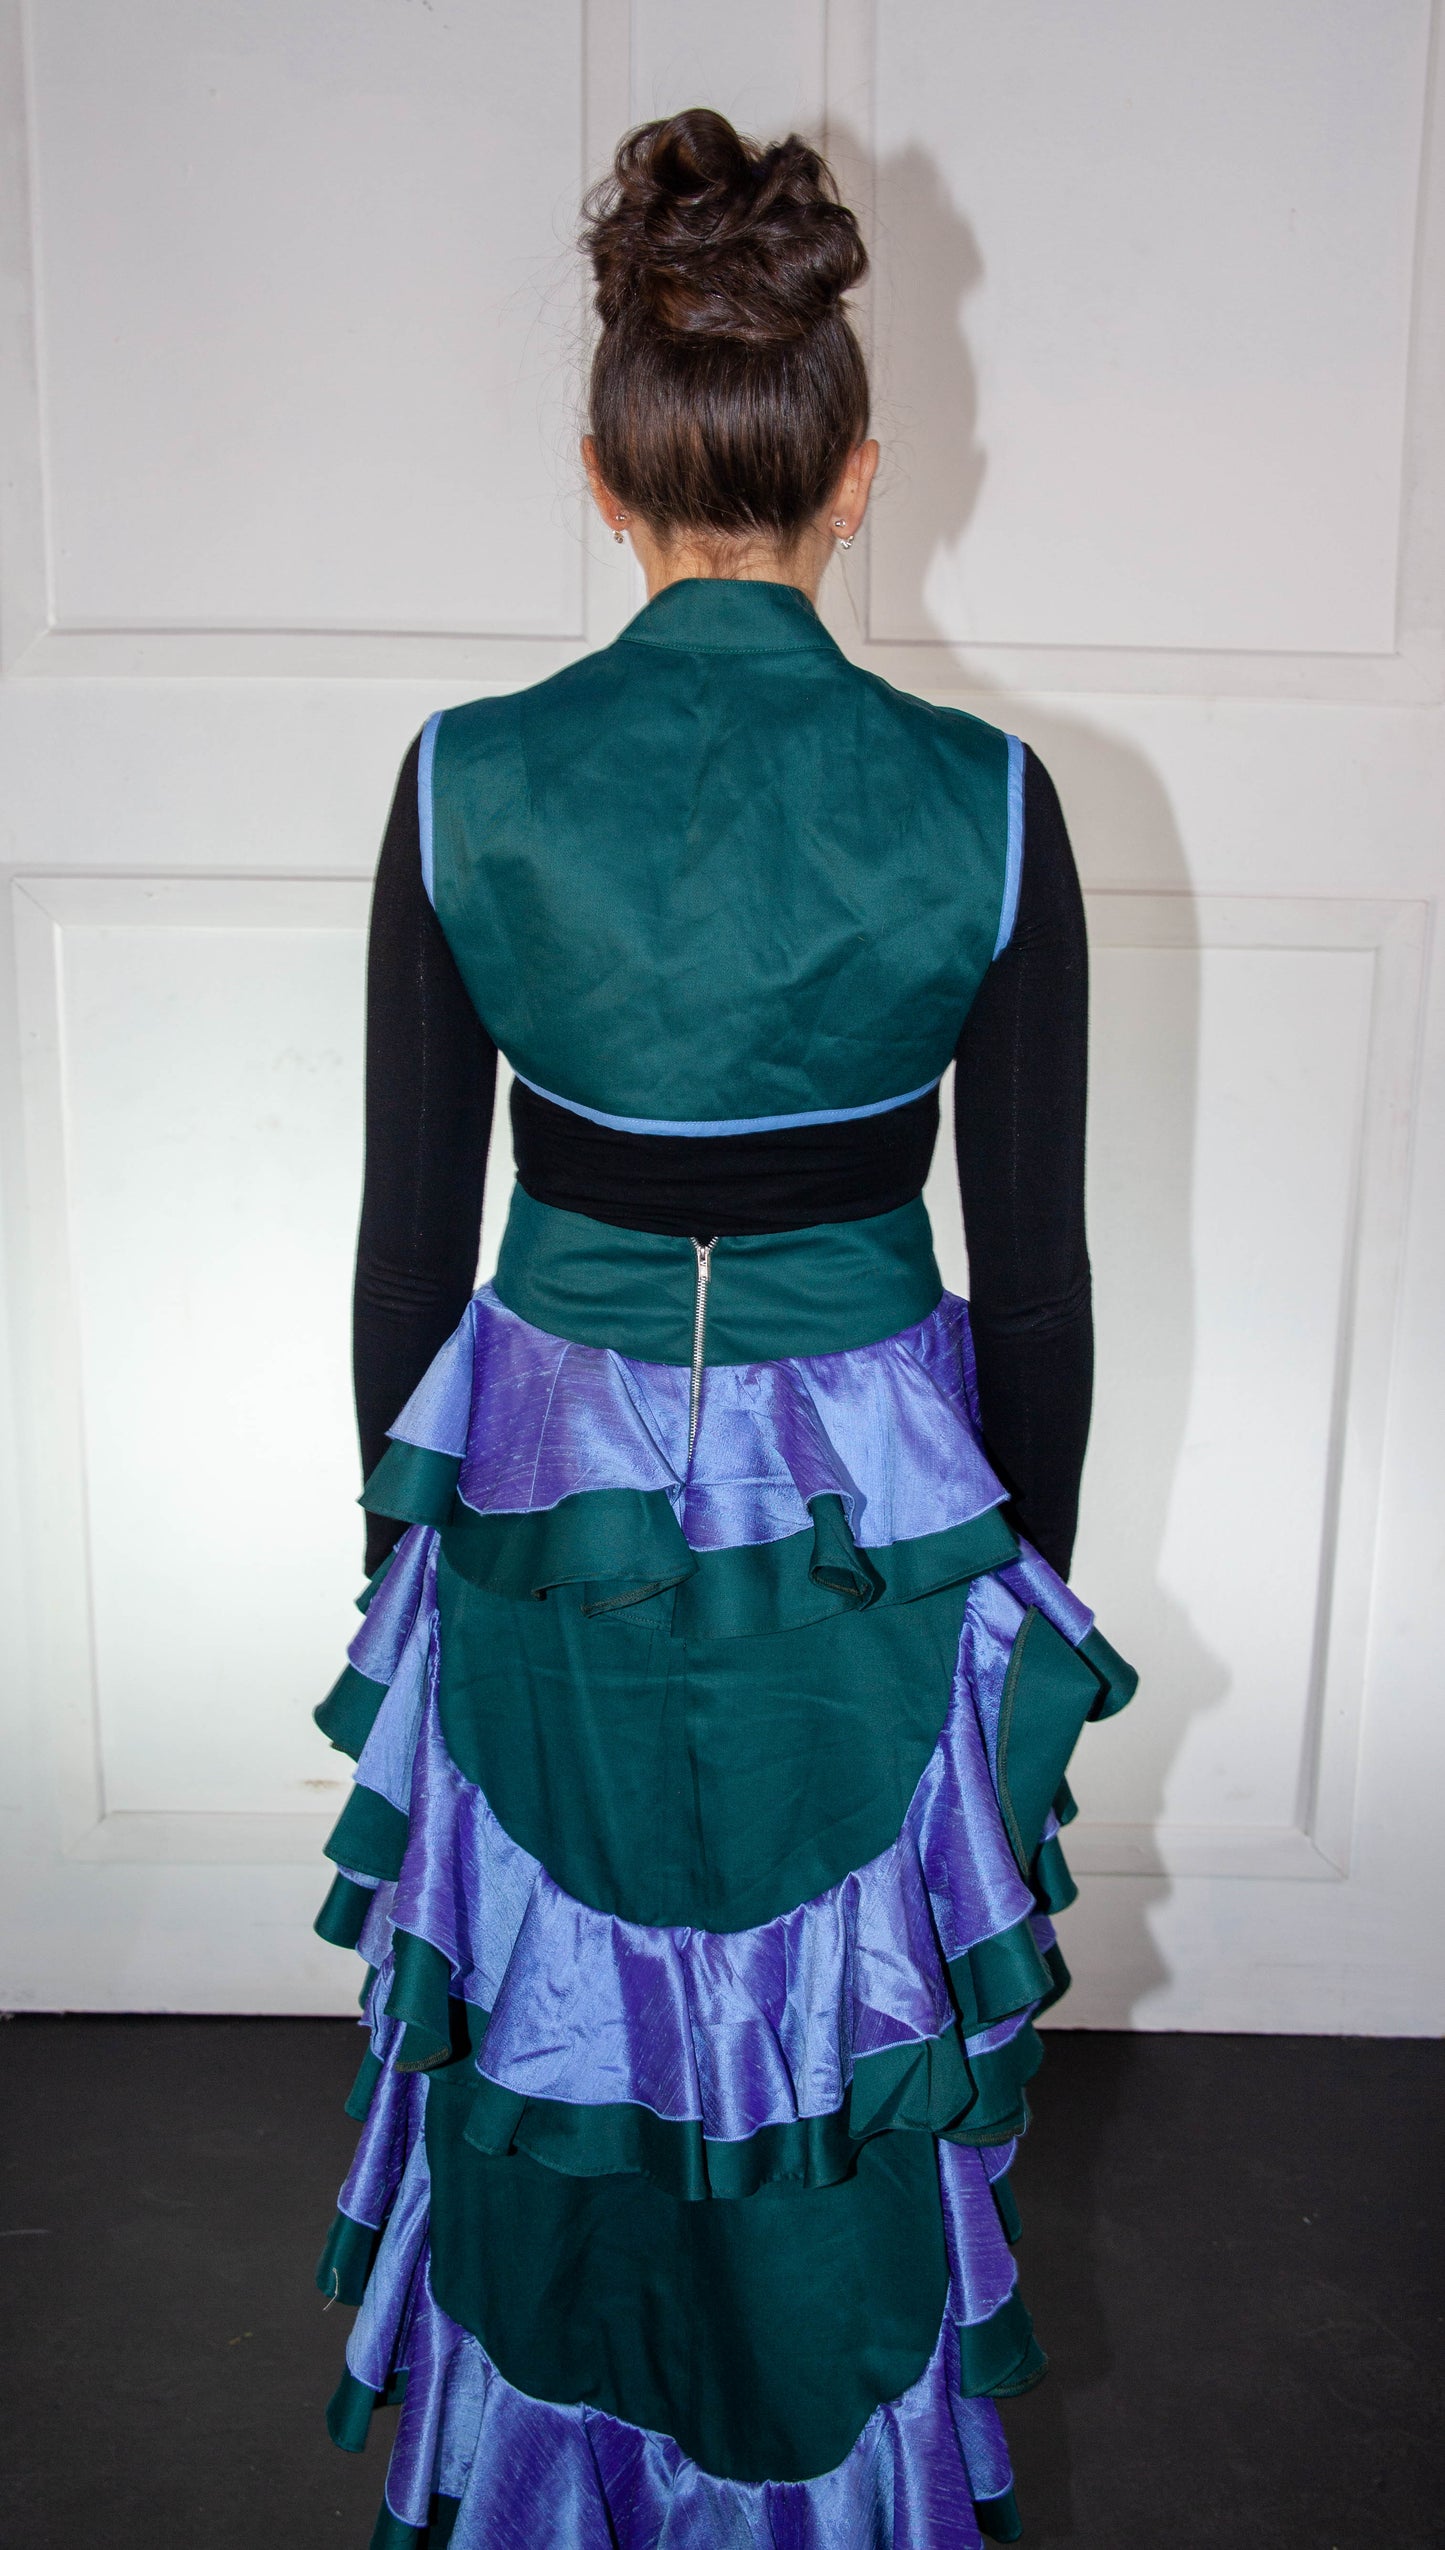 Skirt - Victorian High Low Blue & Green with Jacket